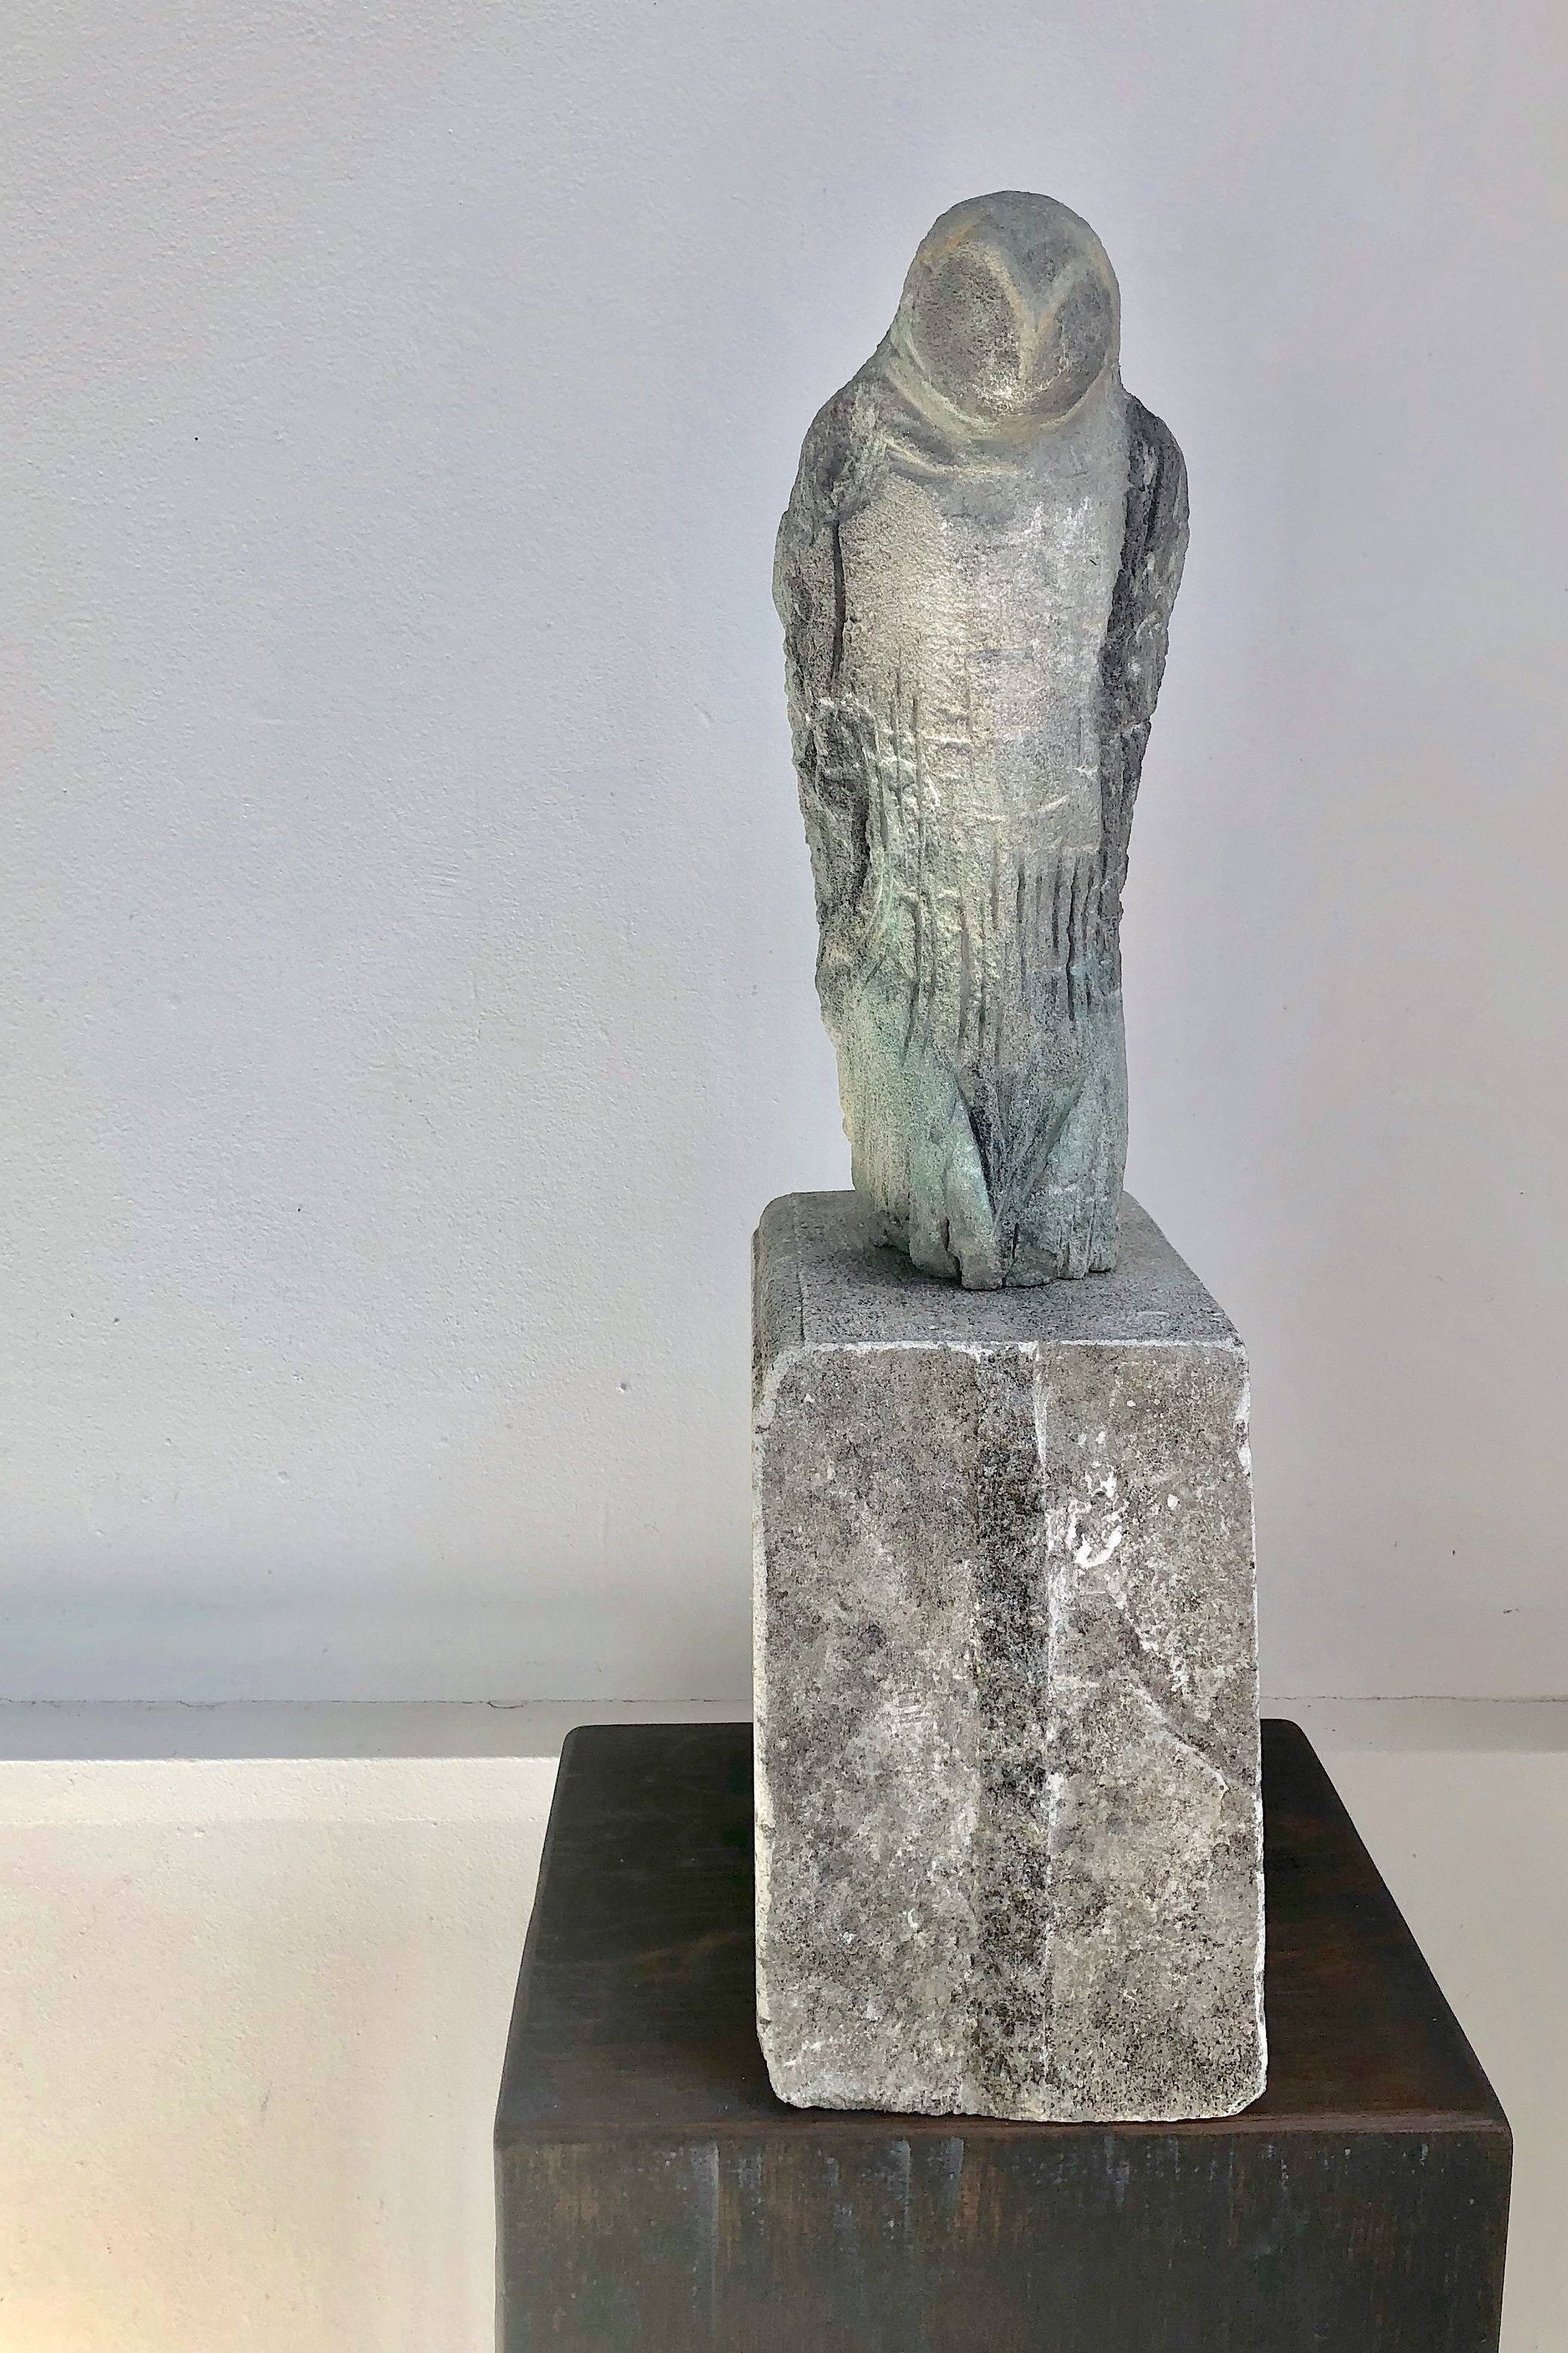  “Yellowstone Owl,” 2019  Provencal limestone and pigment  22 x 6 x 9.5 inches  